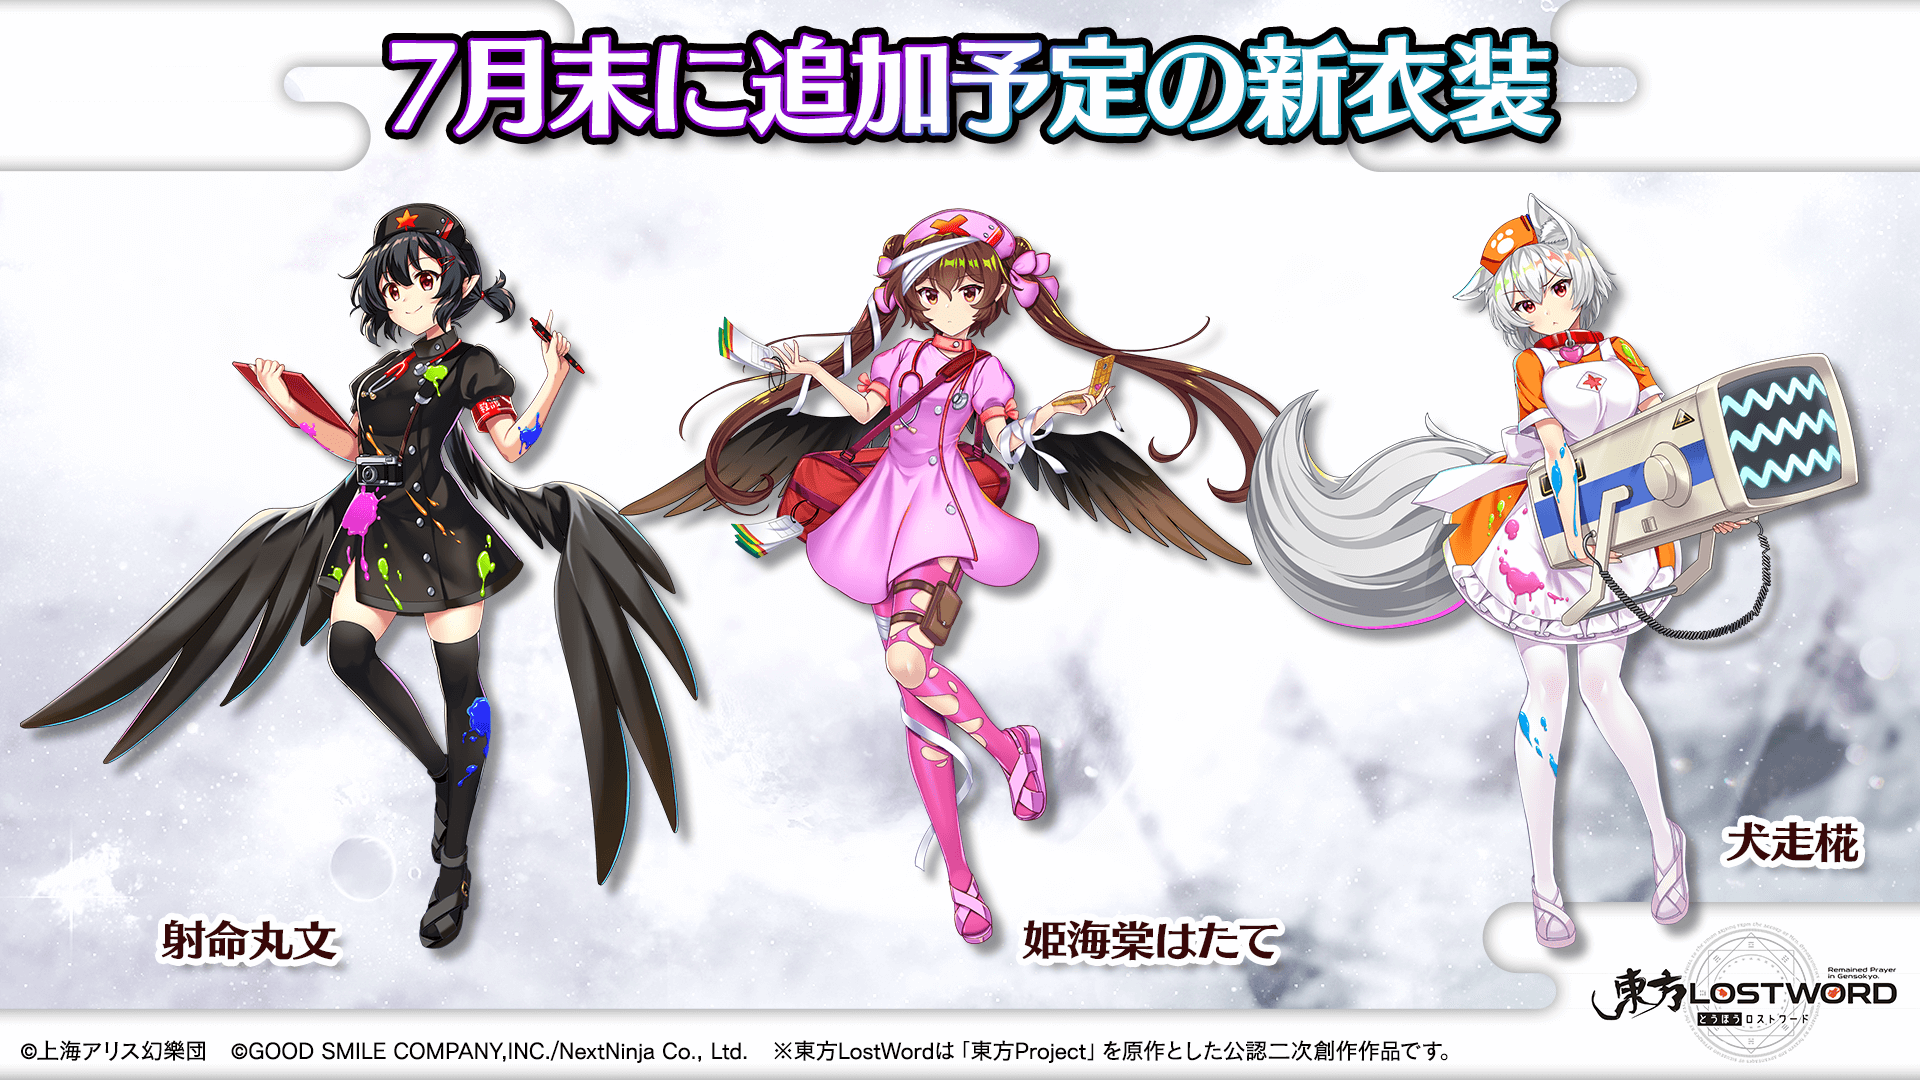 New Costumes for Aya, Hatate, and Momiji